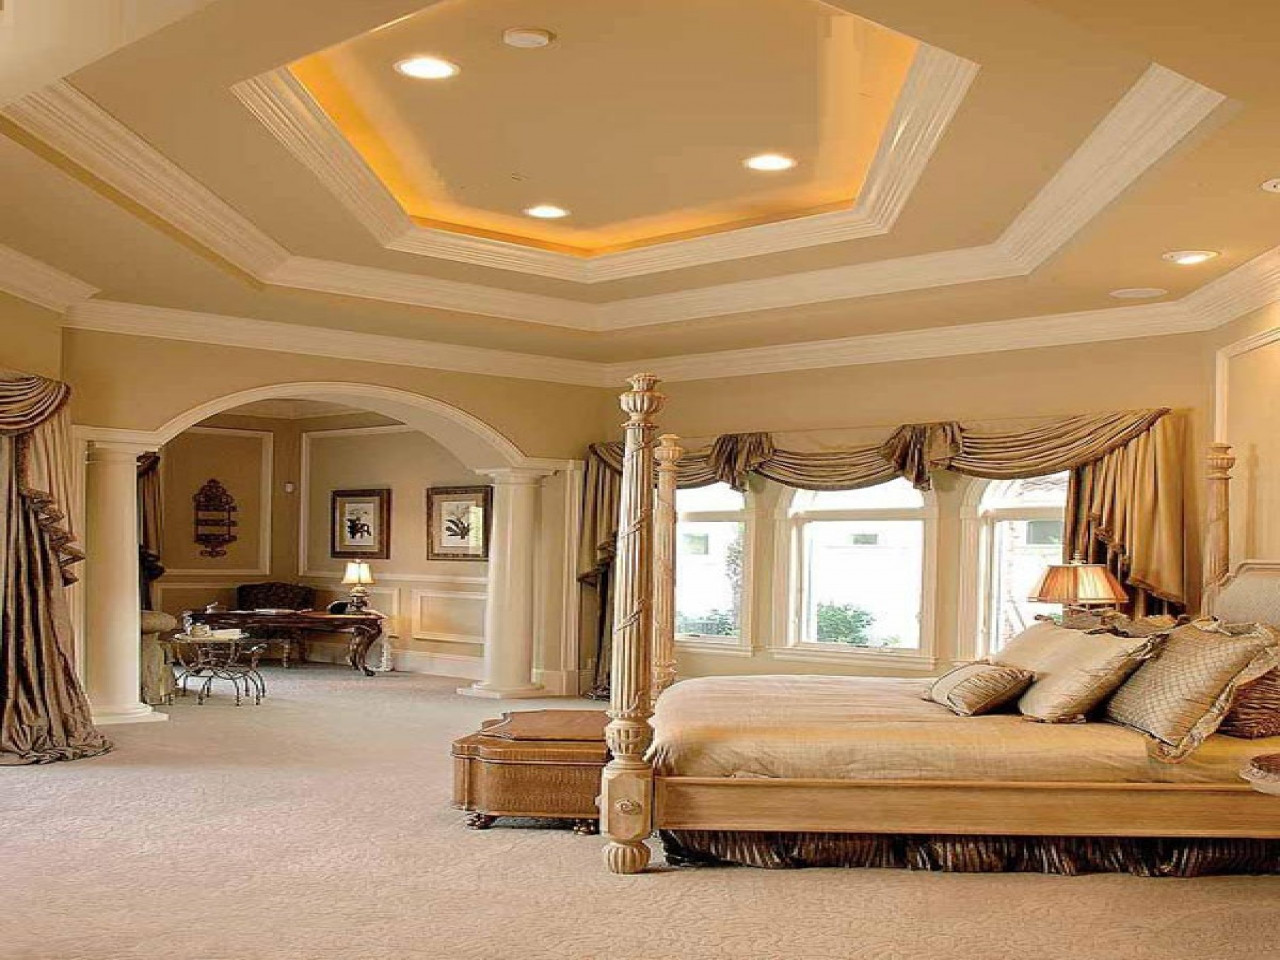 Crown Molding In Master Bedroom
 Awesome bedroom furniture crown molding styles master